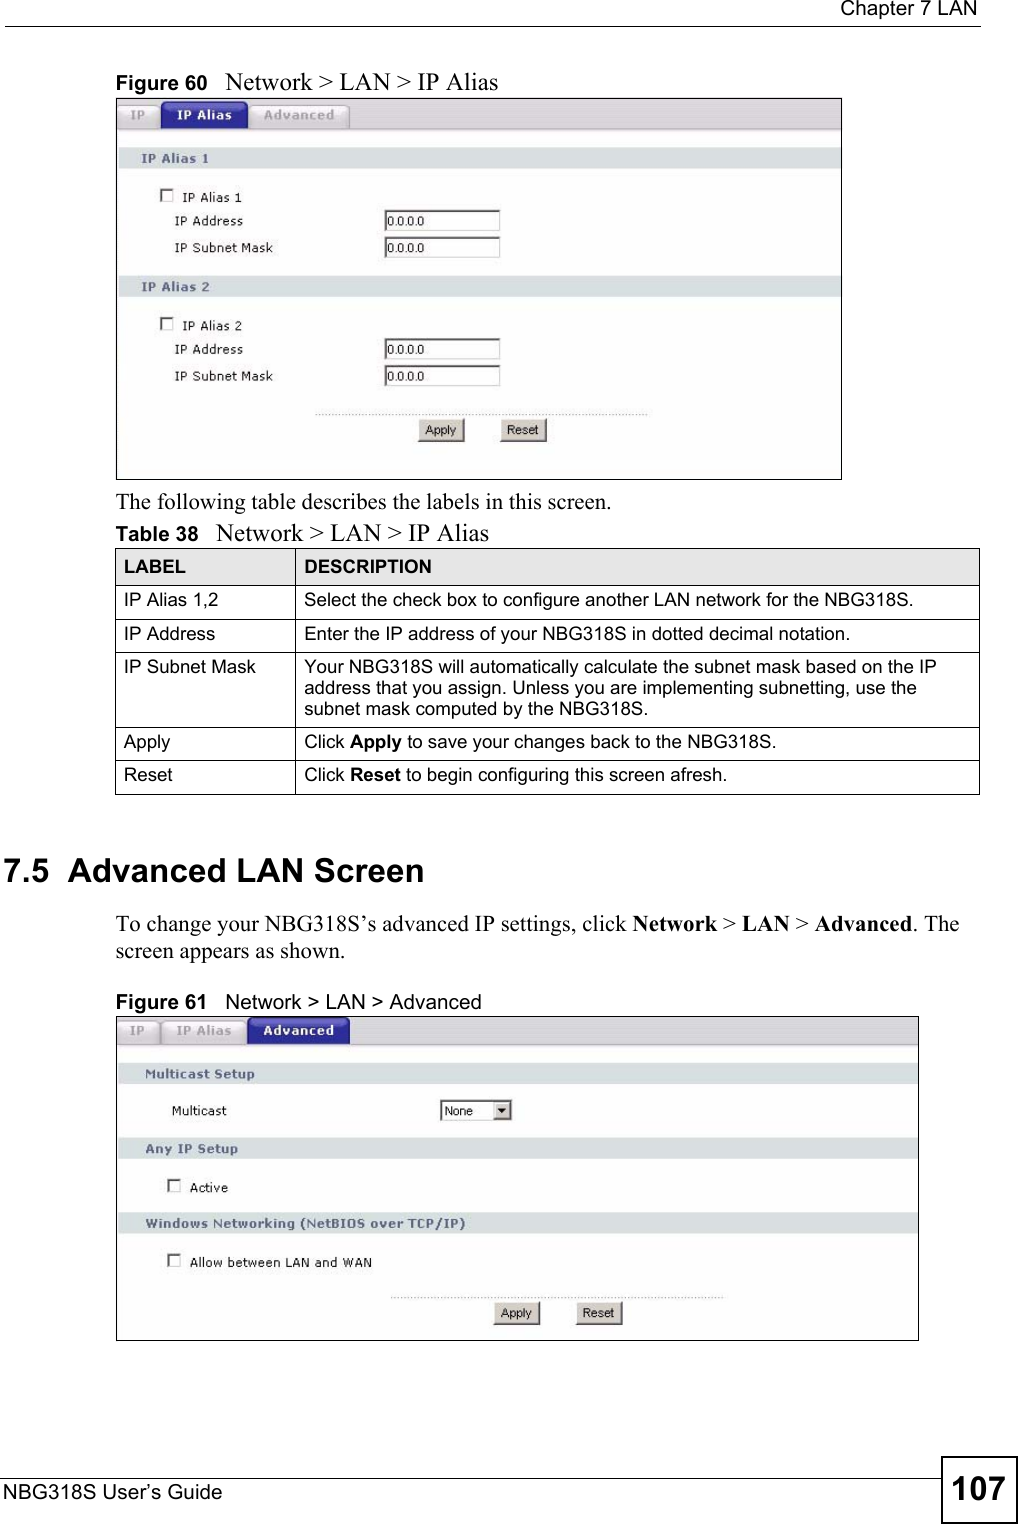  Chapter 7 LANNBG318S User’s Guide 107Figure 60   Network &gt; LAN &gt; IP Alias The following table describes the labels in this screen.7.5  Advanced LAN ScreenTo change your NBG318S’s advanced IP settings, click Network &gt; LAN &gt; Advanced. The screen appears as shown.Figure 61   Network &gt; LAN &gt; Advanced   Table 38   Network &gt; LAN &gt; IP AliasLABEL DESCRIPTIONIP Alias 1,2 Select the check box to configure another LAN network for the NBG318S.IP Address Enter the IP address of your NBG318S in dotted decimal notation. IP Subnet Mask Your NBG318S will automatically calculate the subnet mask based on the IP address that you assign. Unless you are implementing subnetting, use the subnet mask computed by the NBG318S.Apply Click Apply to save your changes back to the NBG318S.Reset Click Reset to begin configuring this screen afresh.